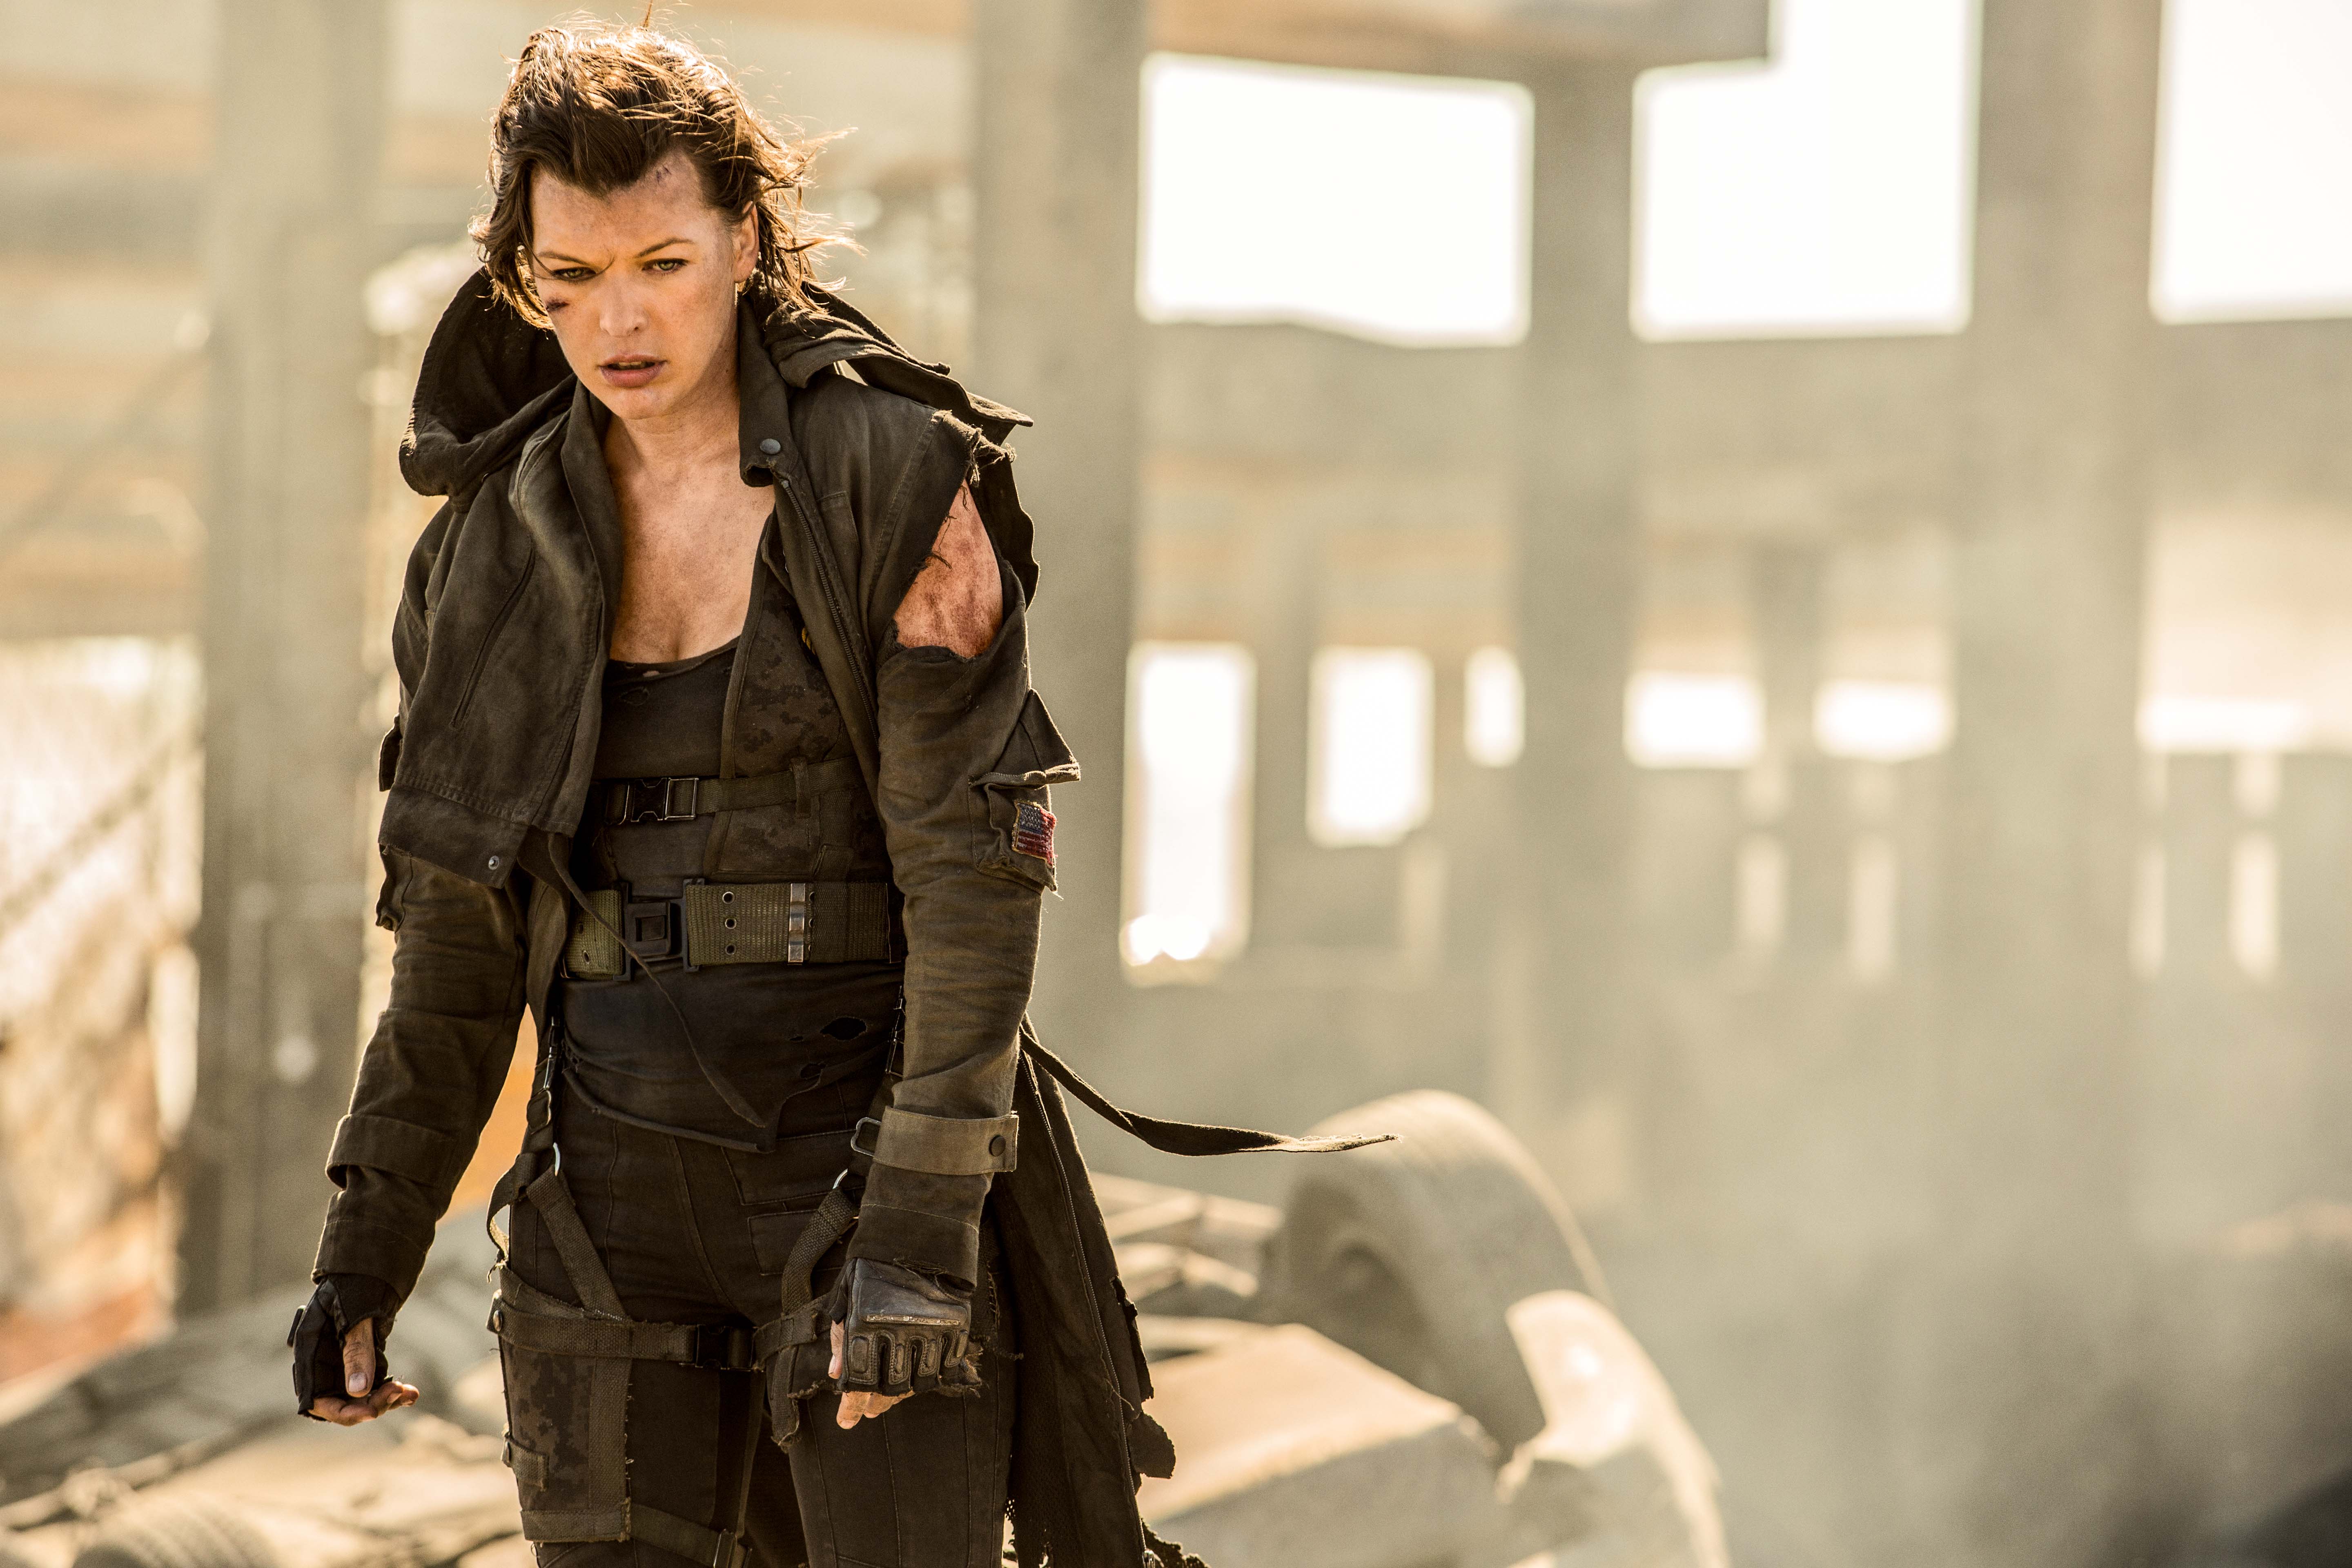 Milla Jovovich stars in Screen Gems' RESIDENT EVIL: THE FINAL CHAPTER. lze Kitshoff - © 2016 Davis Films/Impact Pictures (RE6) Inc. and Constantin Film International GmbH. All rights reserved.